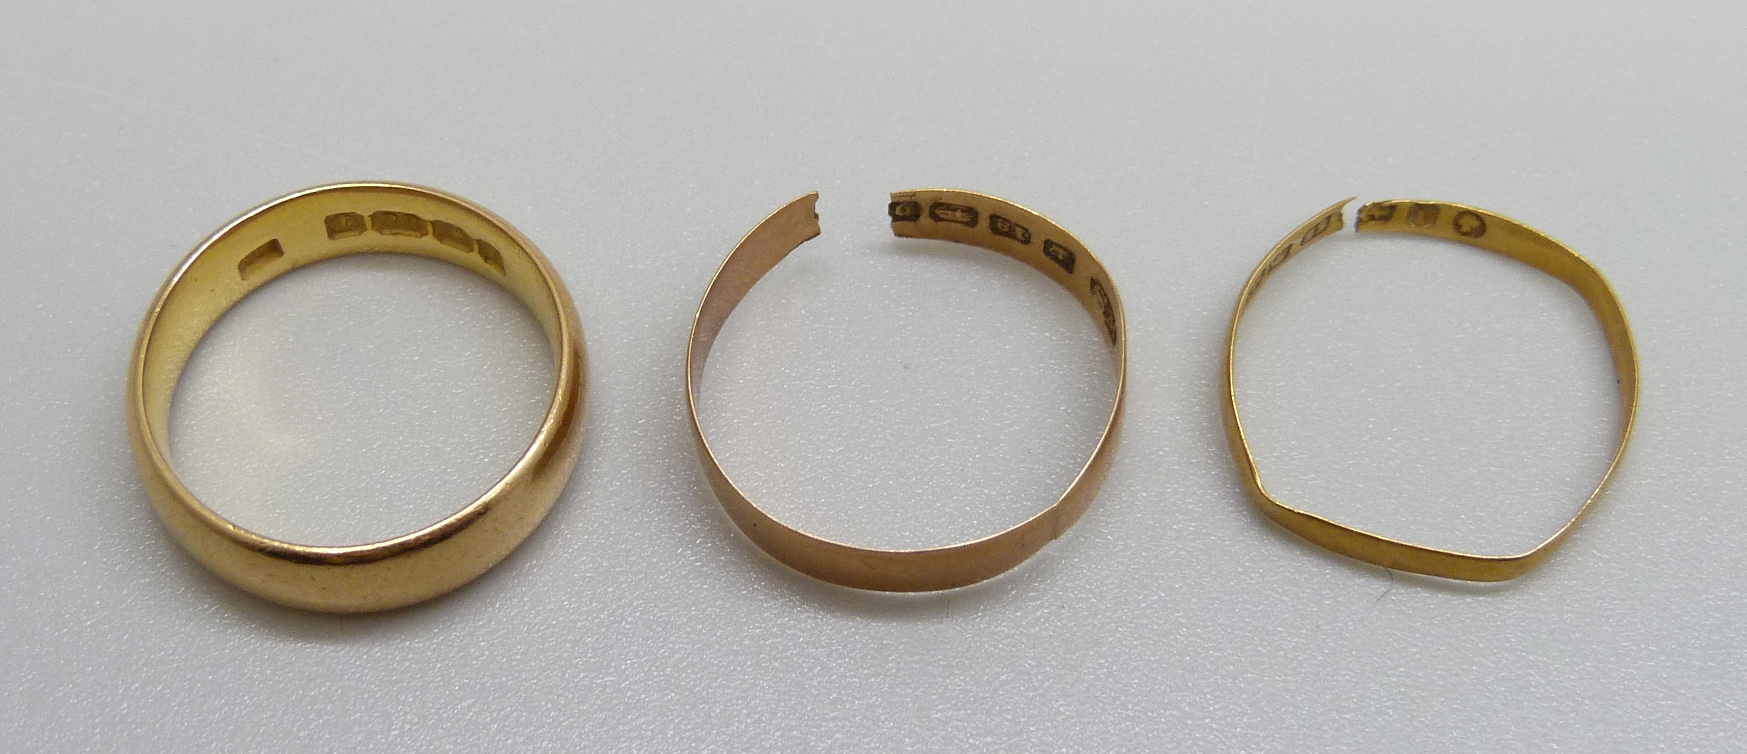 A 22ct gold wedding ring, 6g, M, one other 22ct gold ring, a/f, 0.8g, and an 18ct gold ring, a/f, - Image 2 of 2